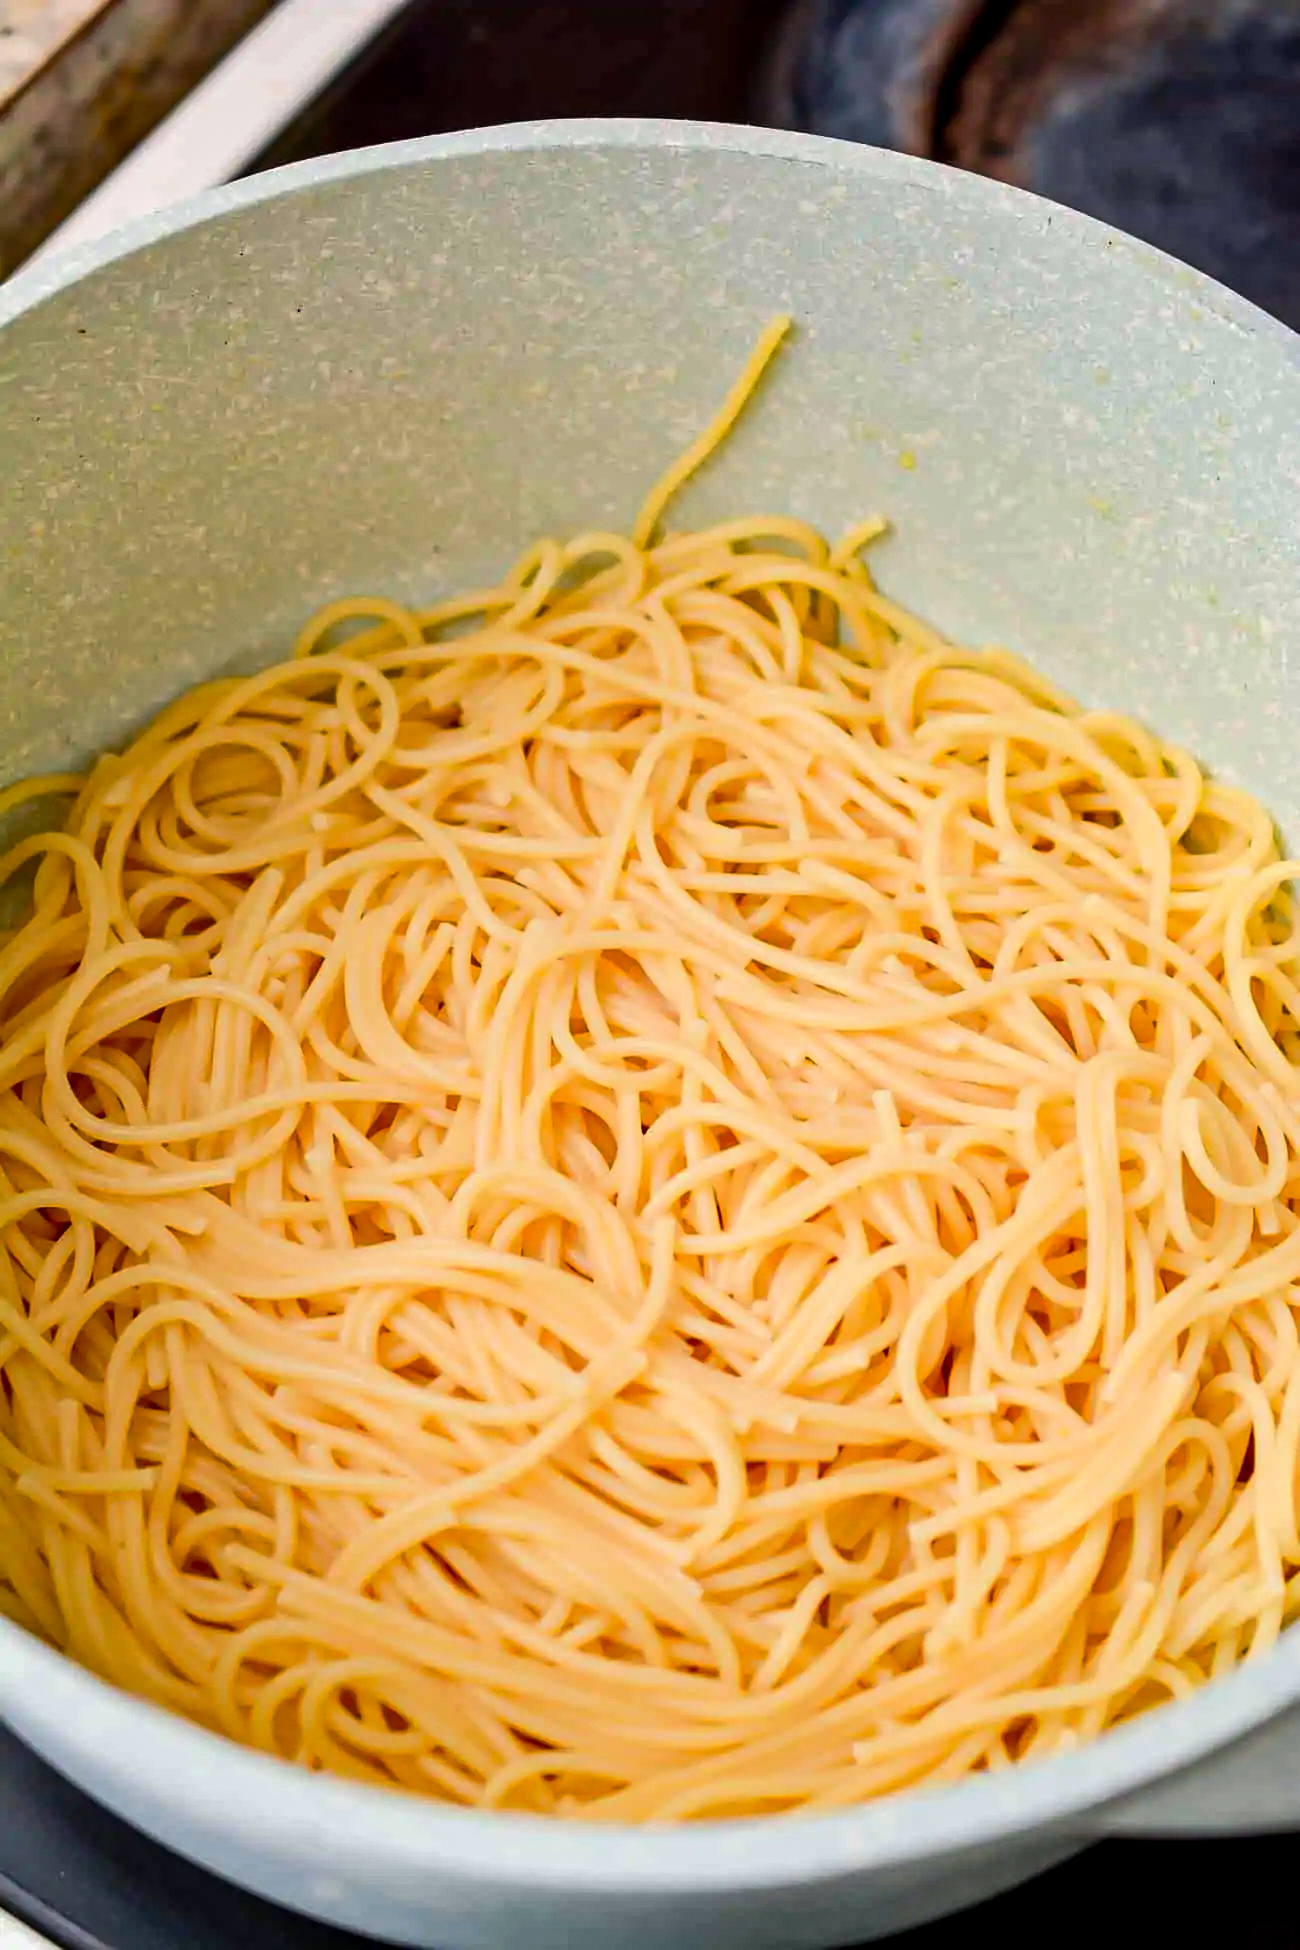 Boil the spaghetti noodles and cook to al dente. Drain and set aside.